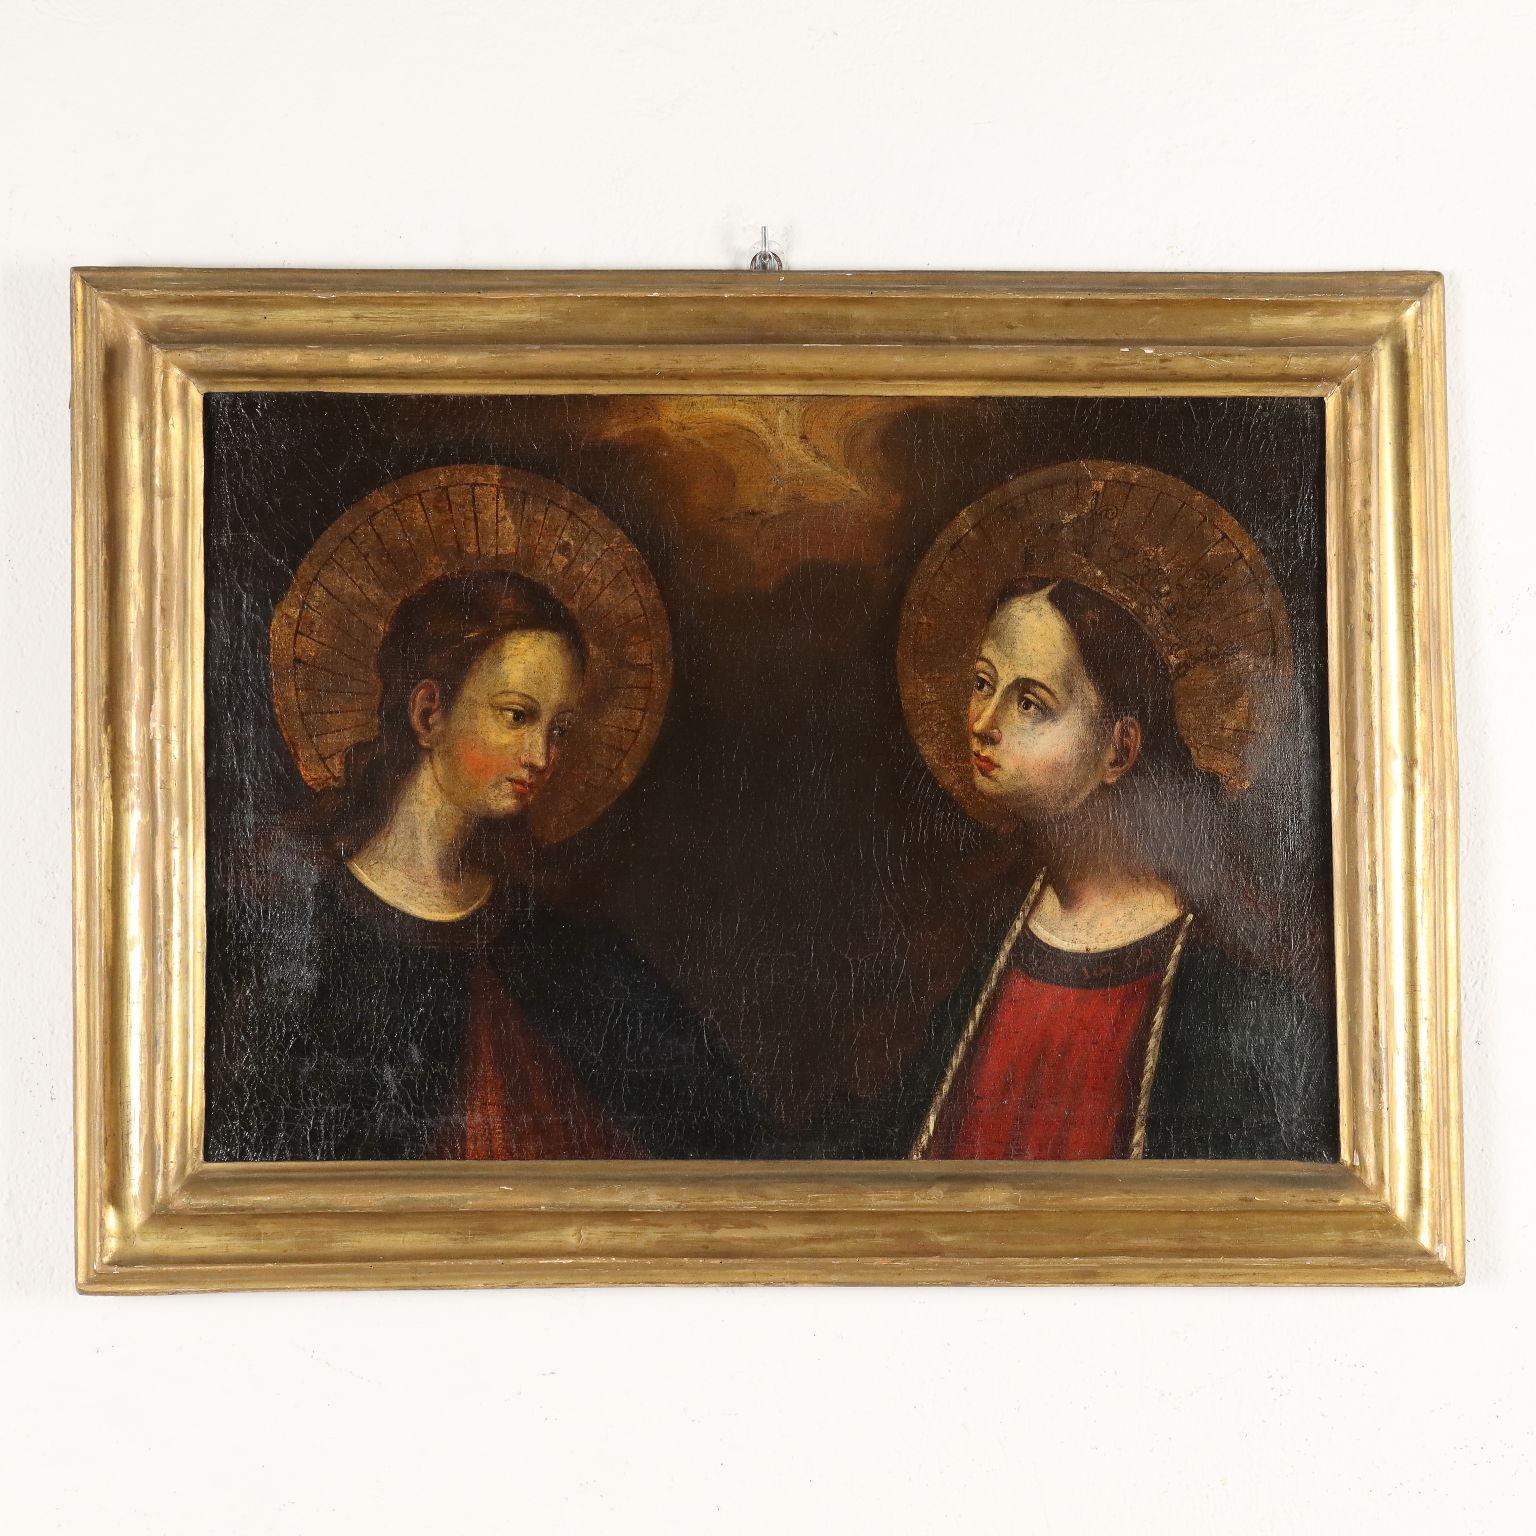 Unknown Figurative Painting - Painting with Two Saints, 17th century